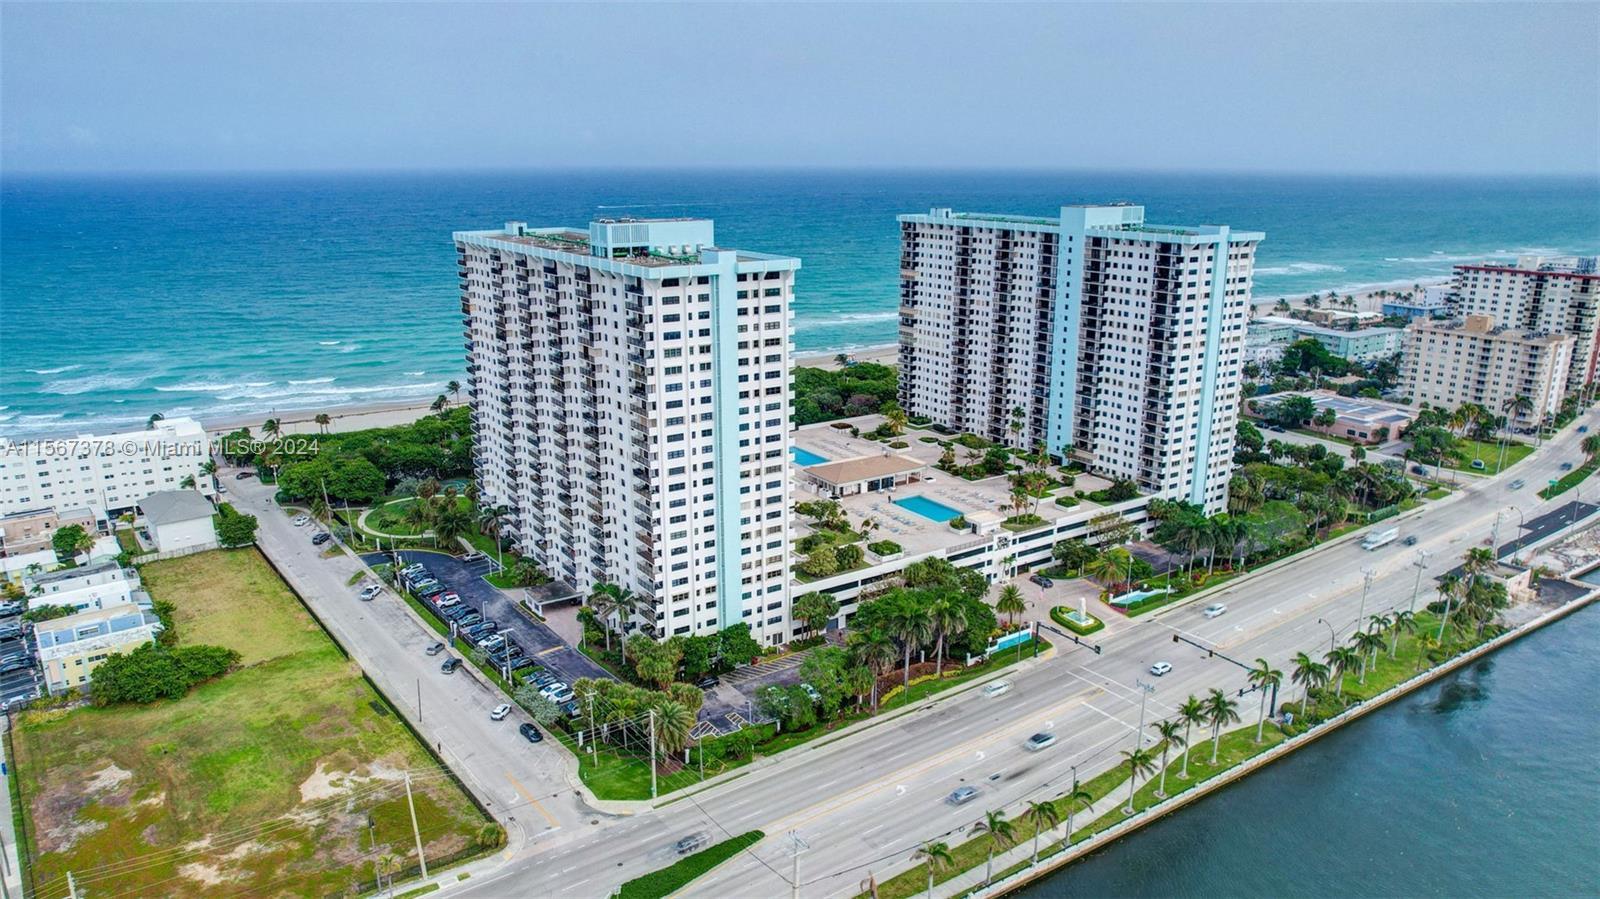 Indulge in oceanfront living with direct beach access & panoramic intracoastal views. This Summit To